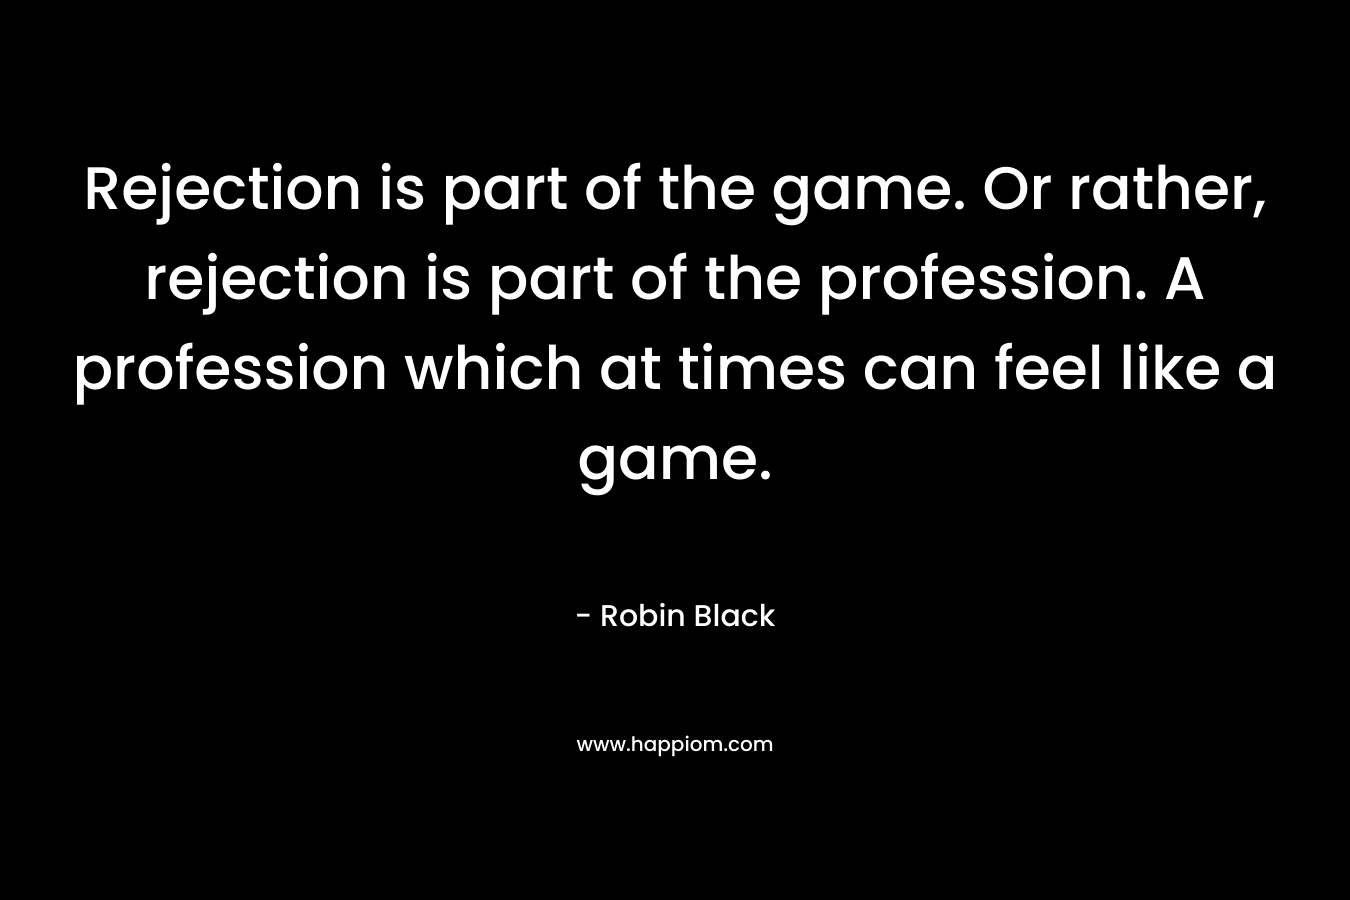 Rejection is part of the game. Or rather, rejection is part of the profession. A profession which at times can feel like a game.